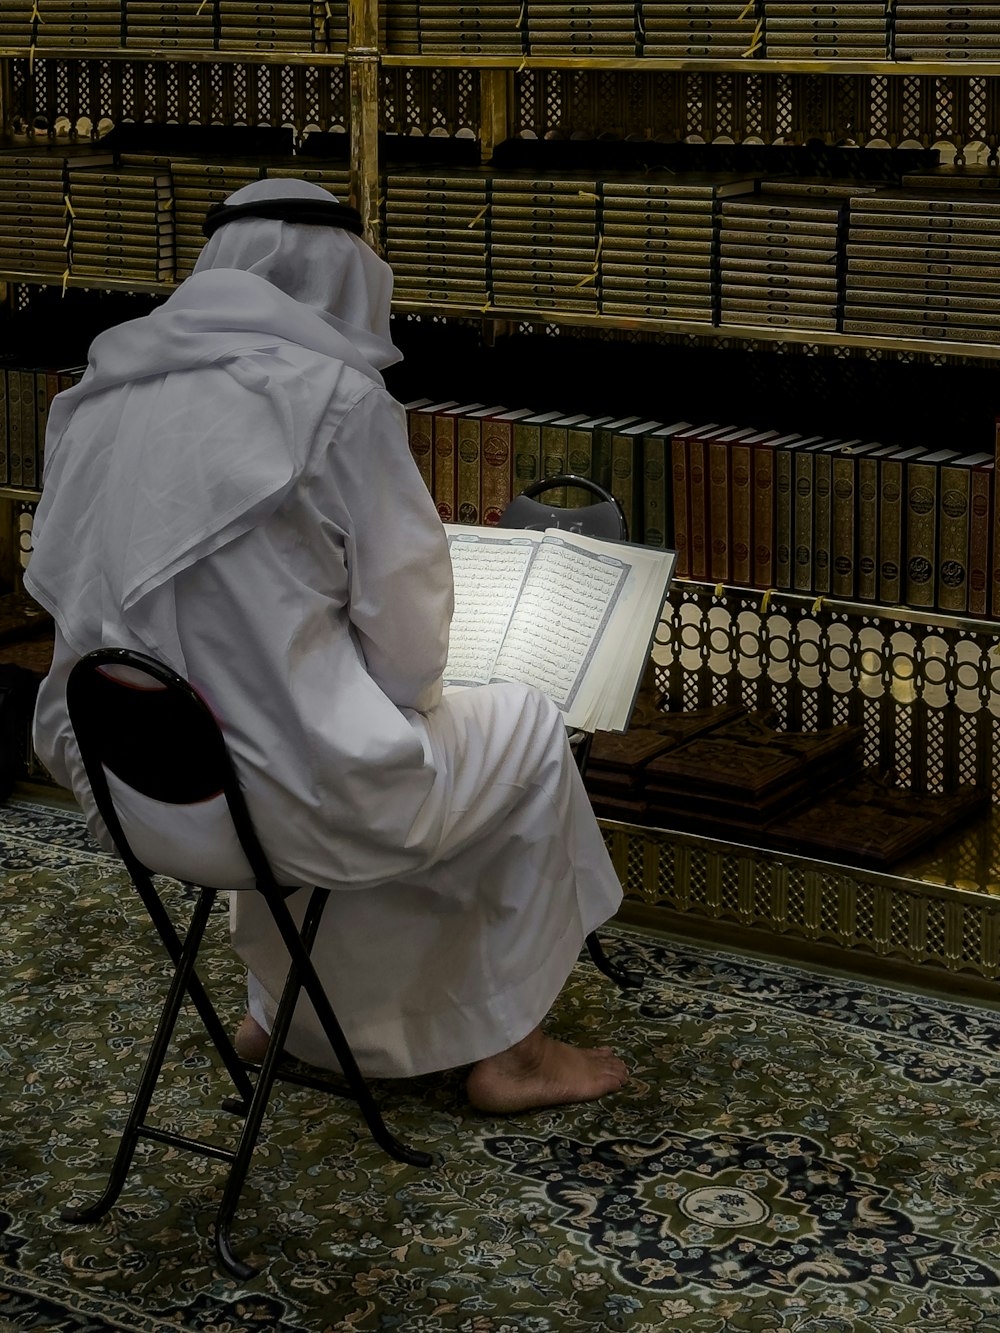 a person sitting in a chair reading a book